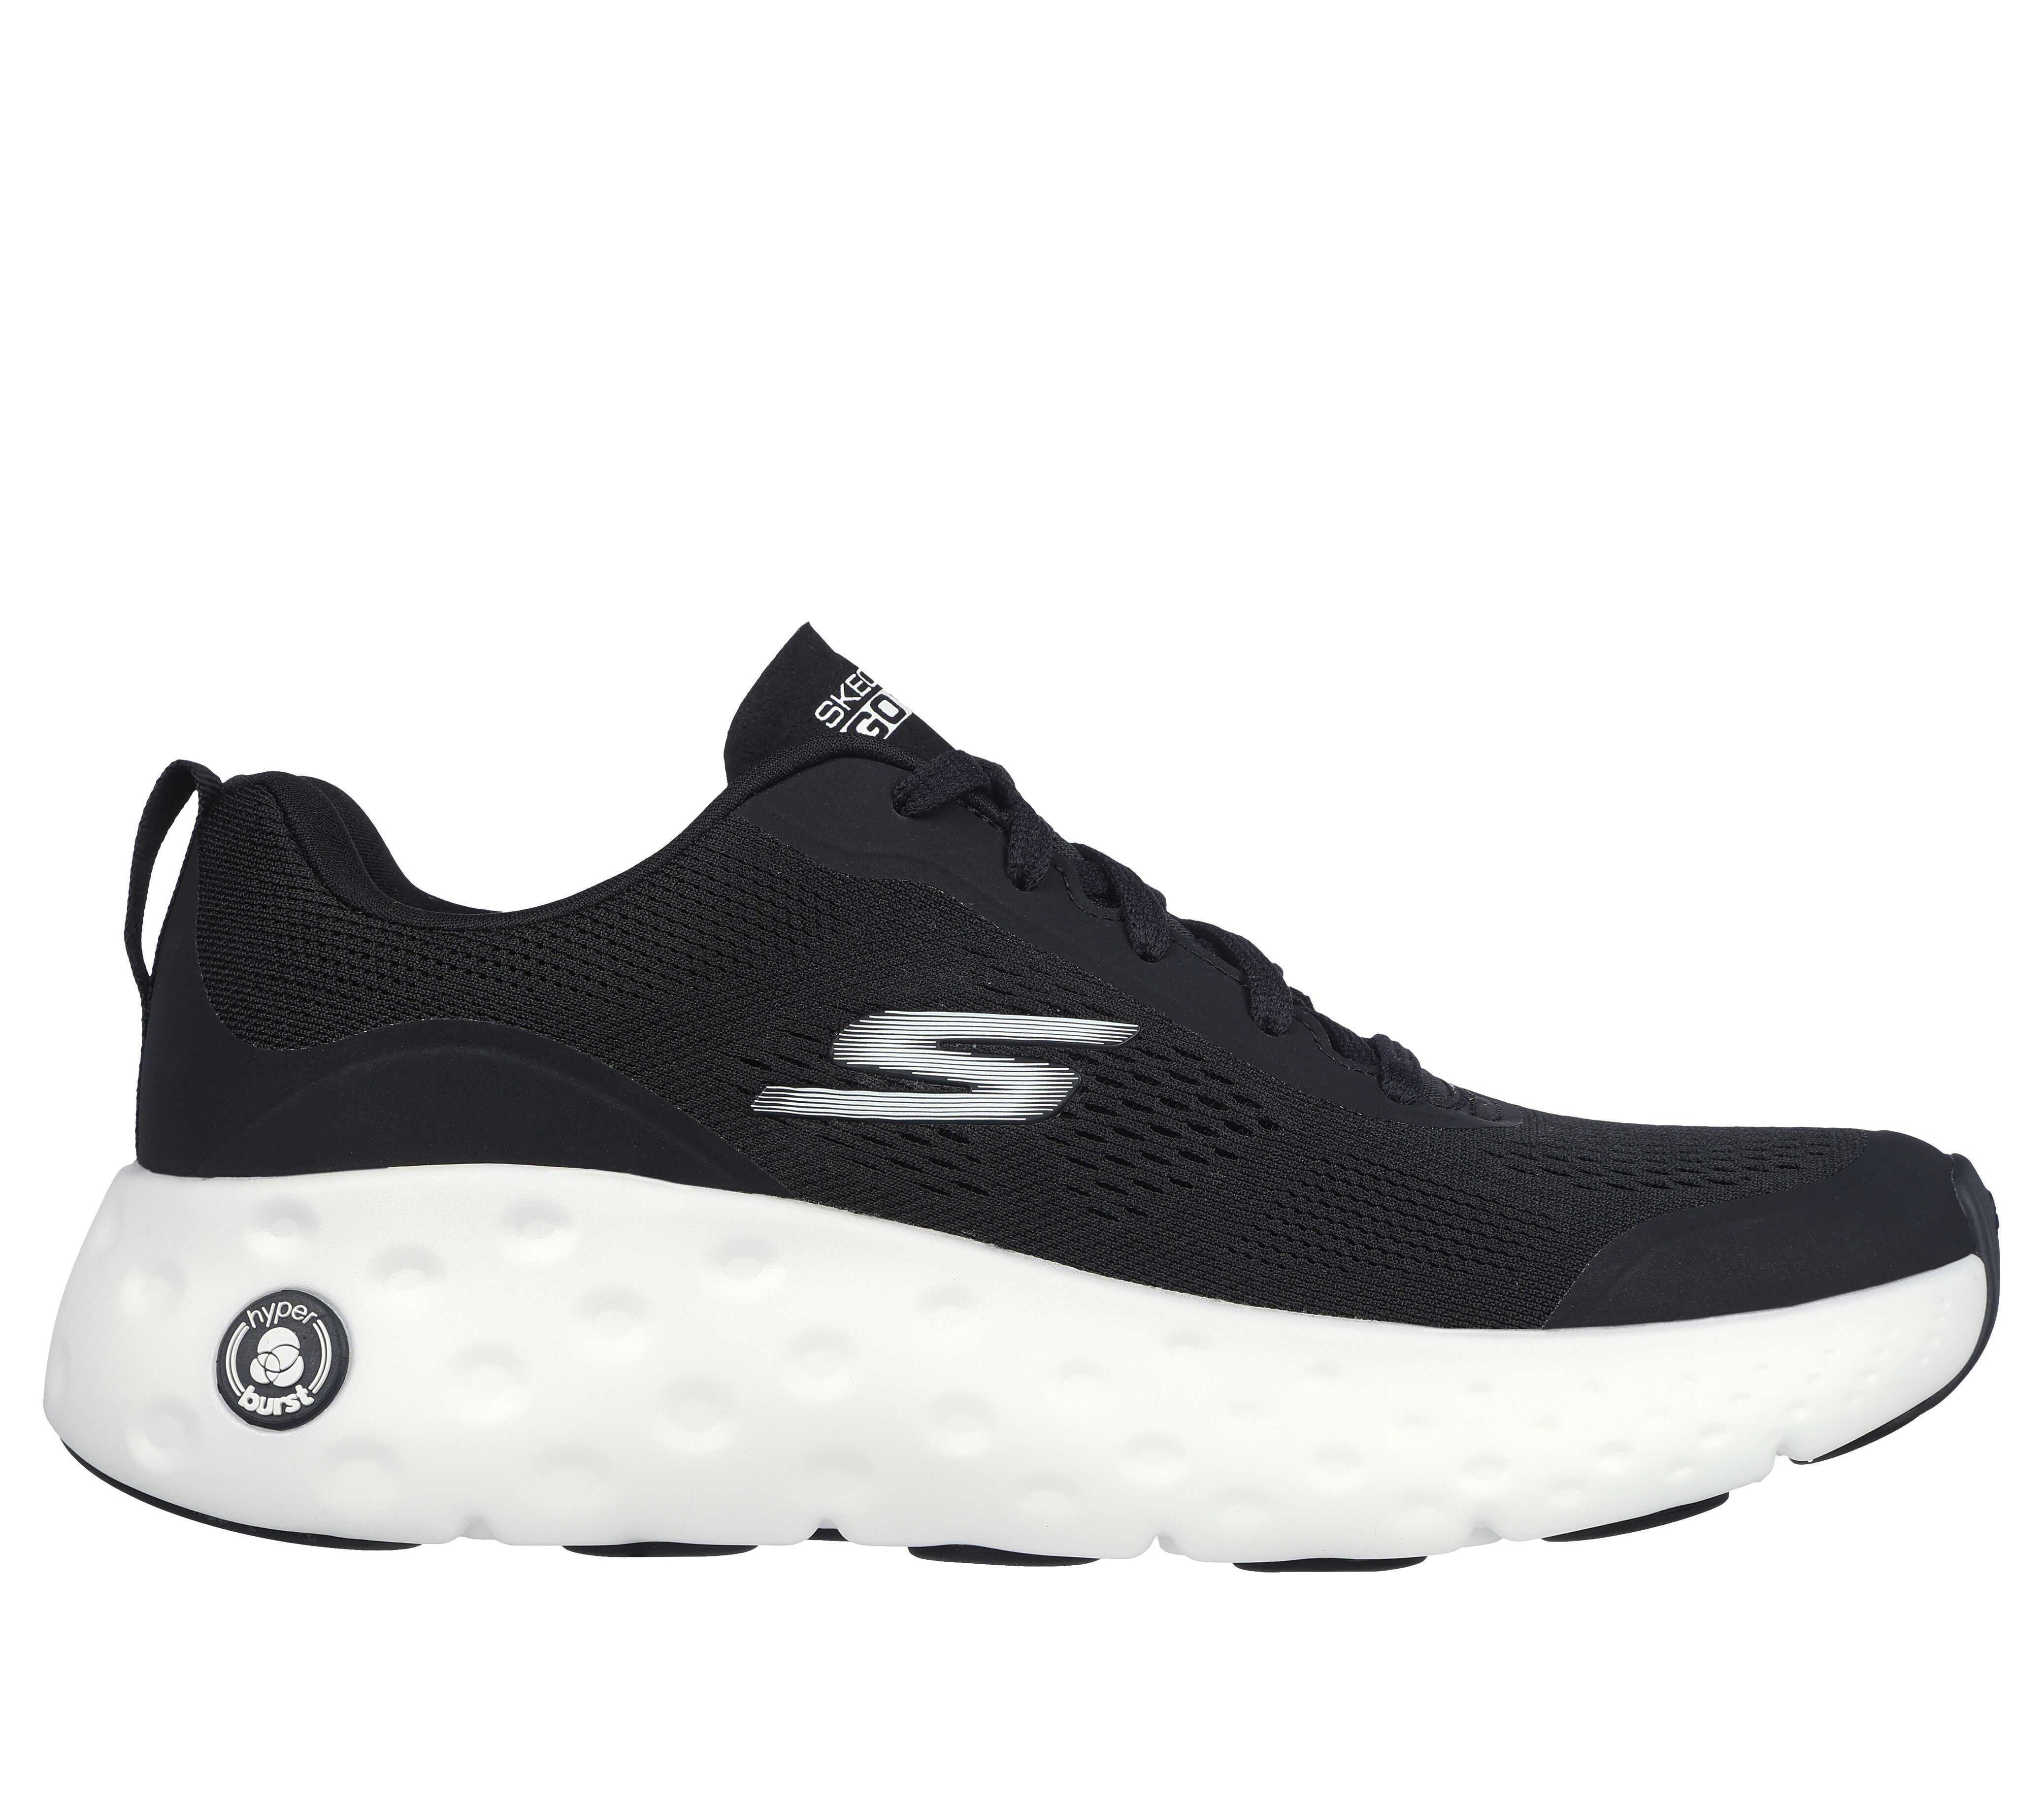 skechers air cooled goga mat shoes price